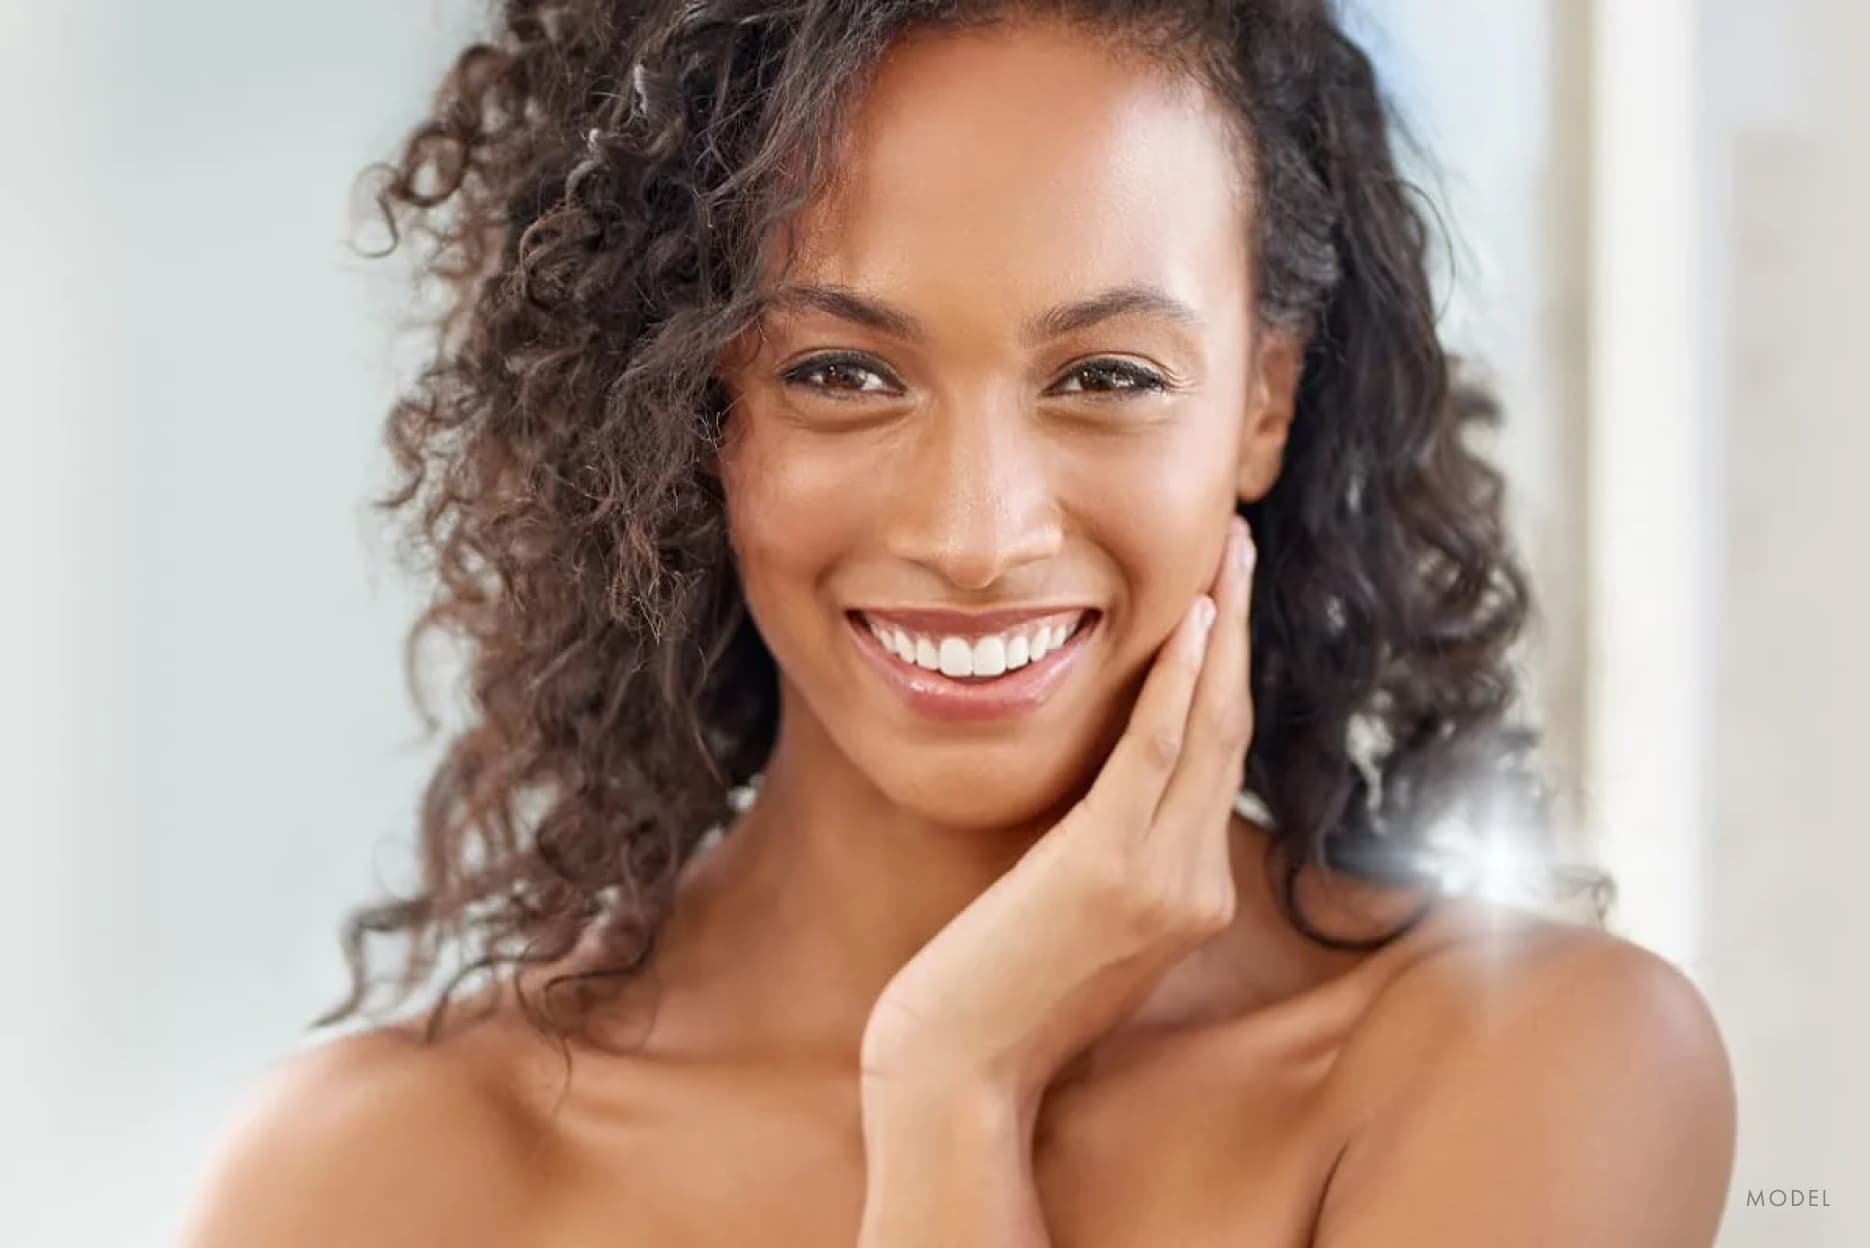 Woman smiling and looking in the mirror observing her healthy skin